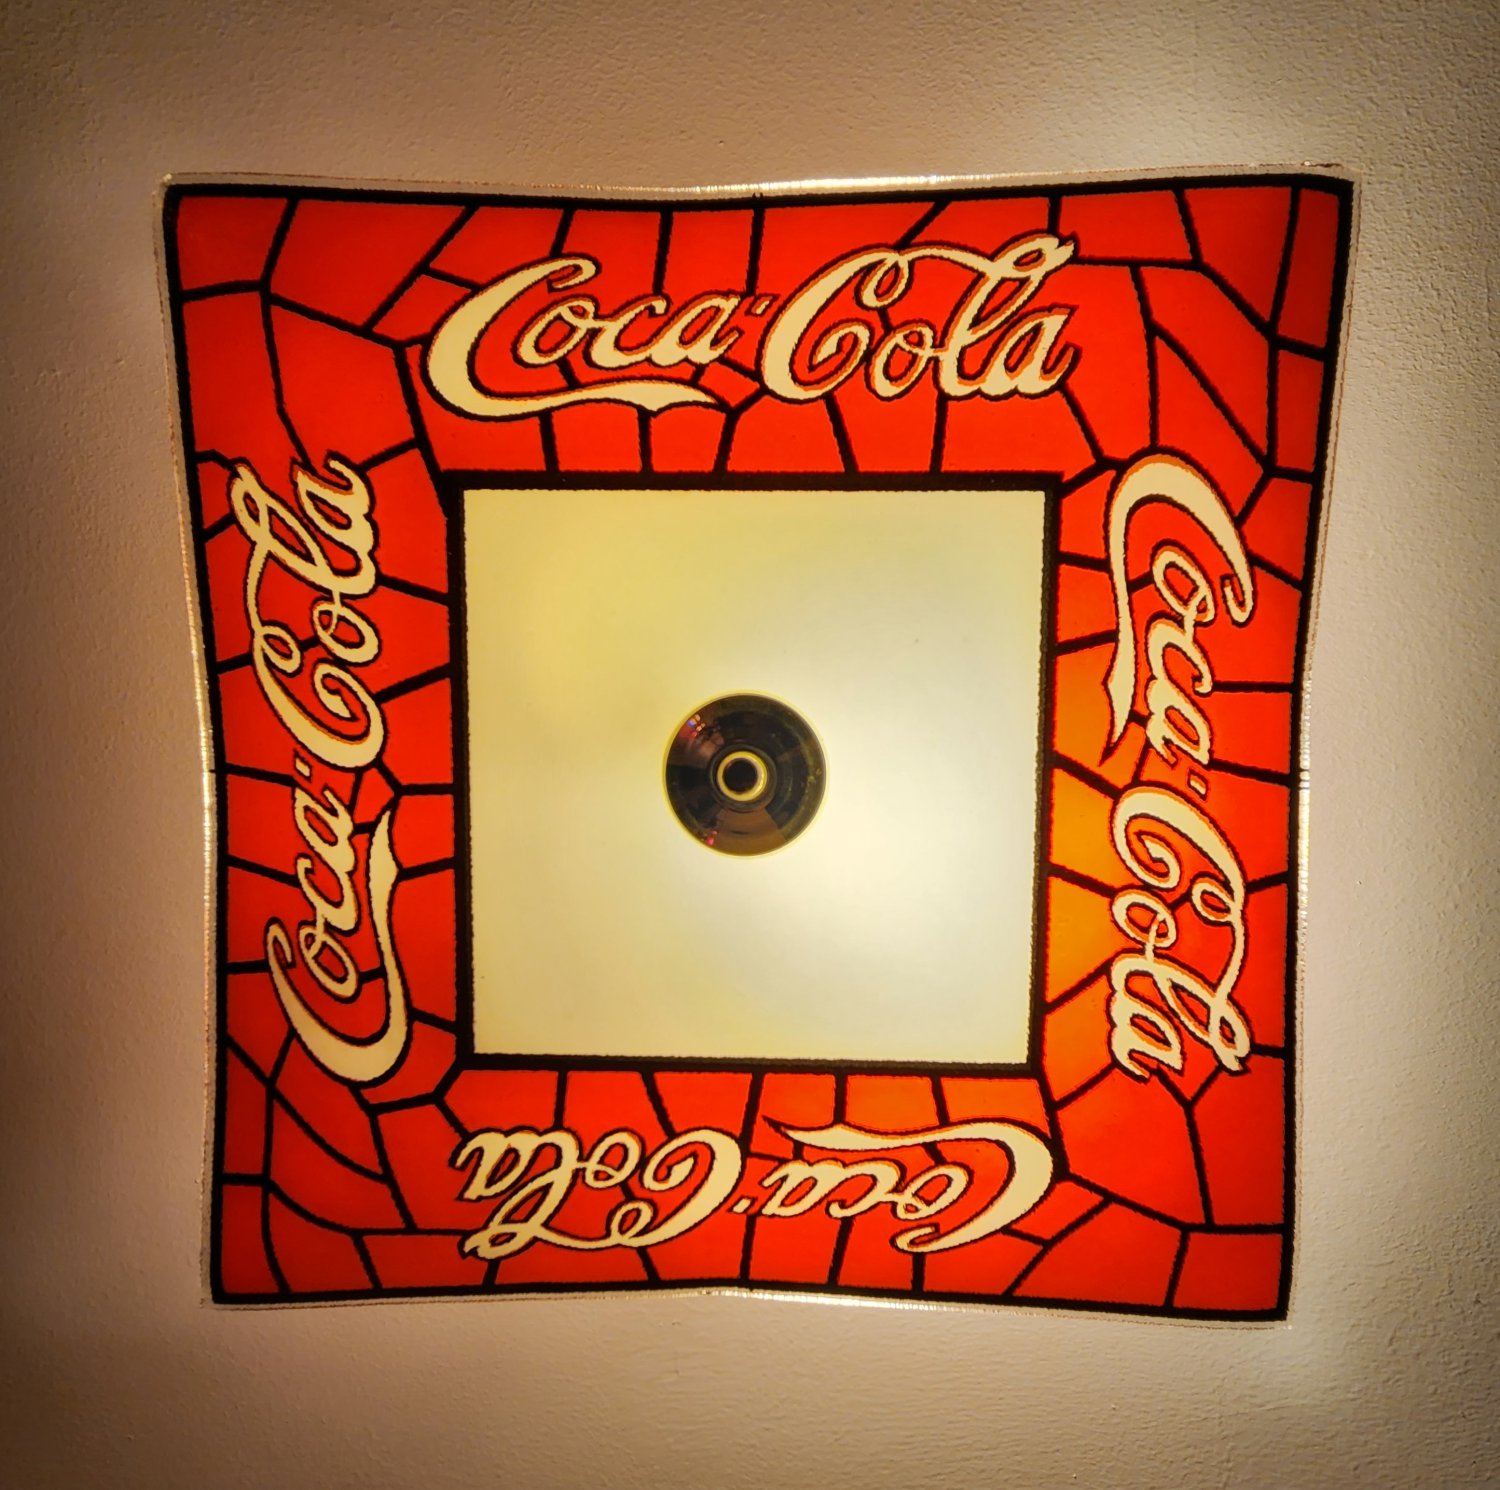 Coca-Cola Tiffany Style Glass Ceiling Light Shade Cover Coke